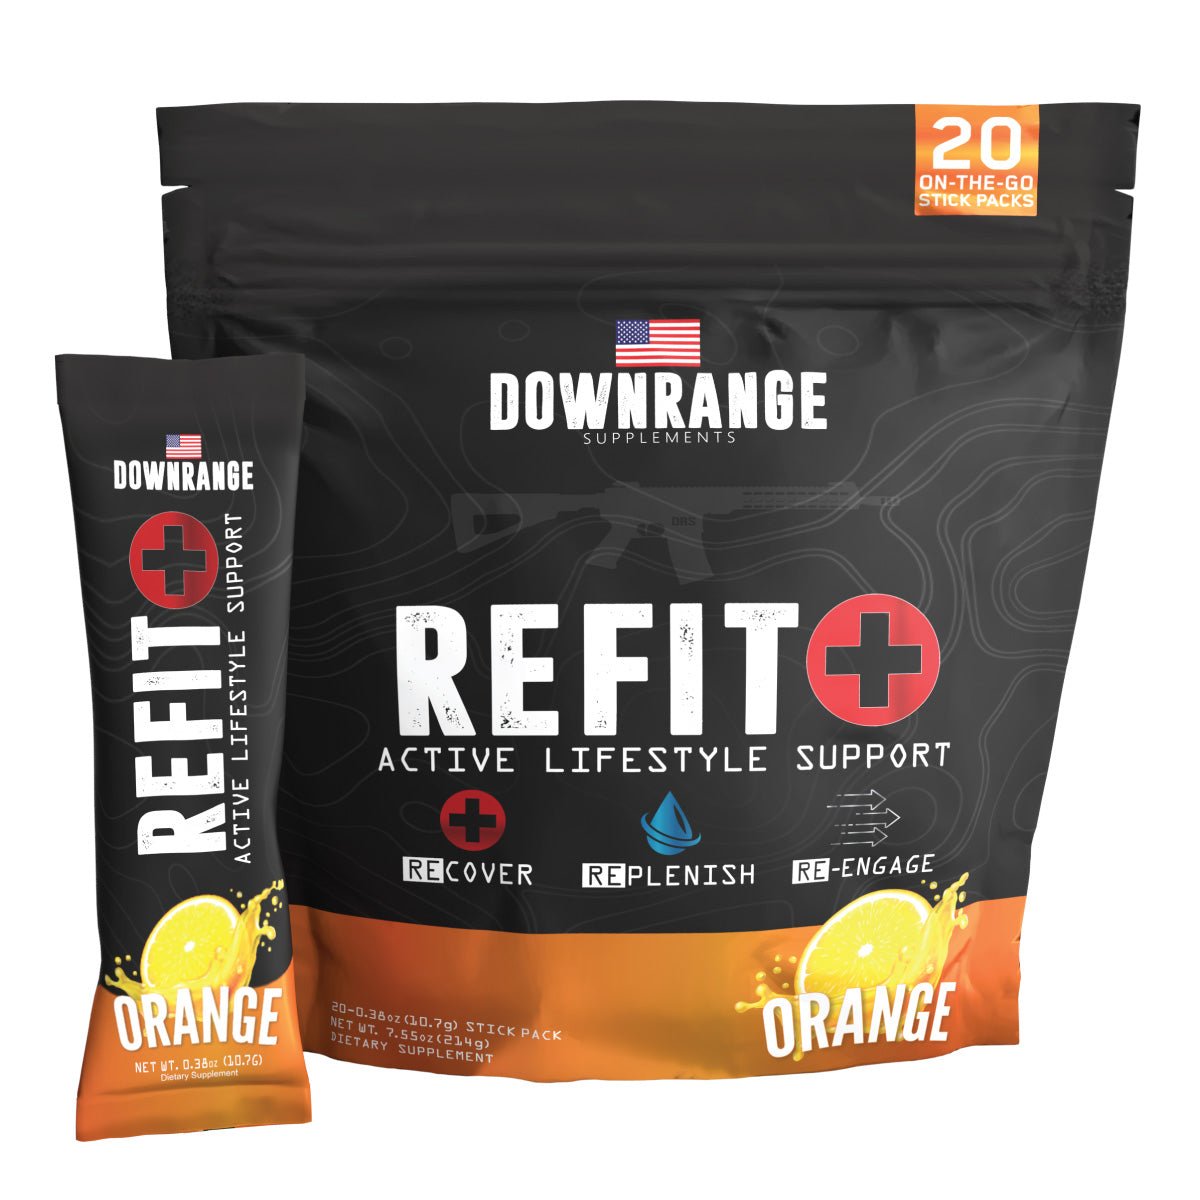 HEALTHY LIFESTYLE SUPPORT - DownRange Supplements